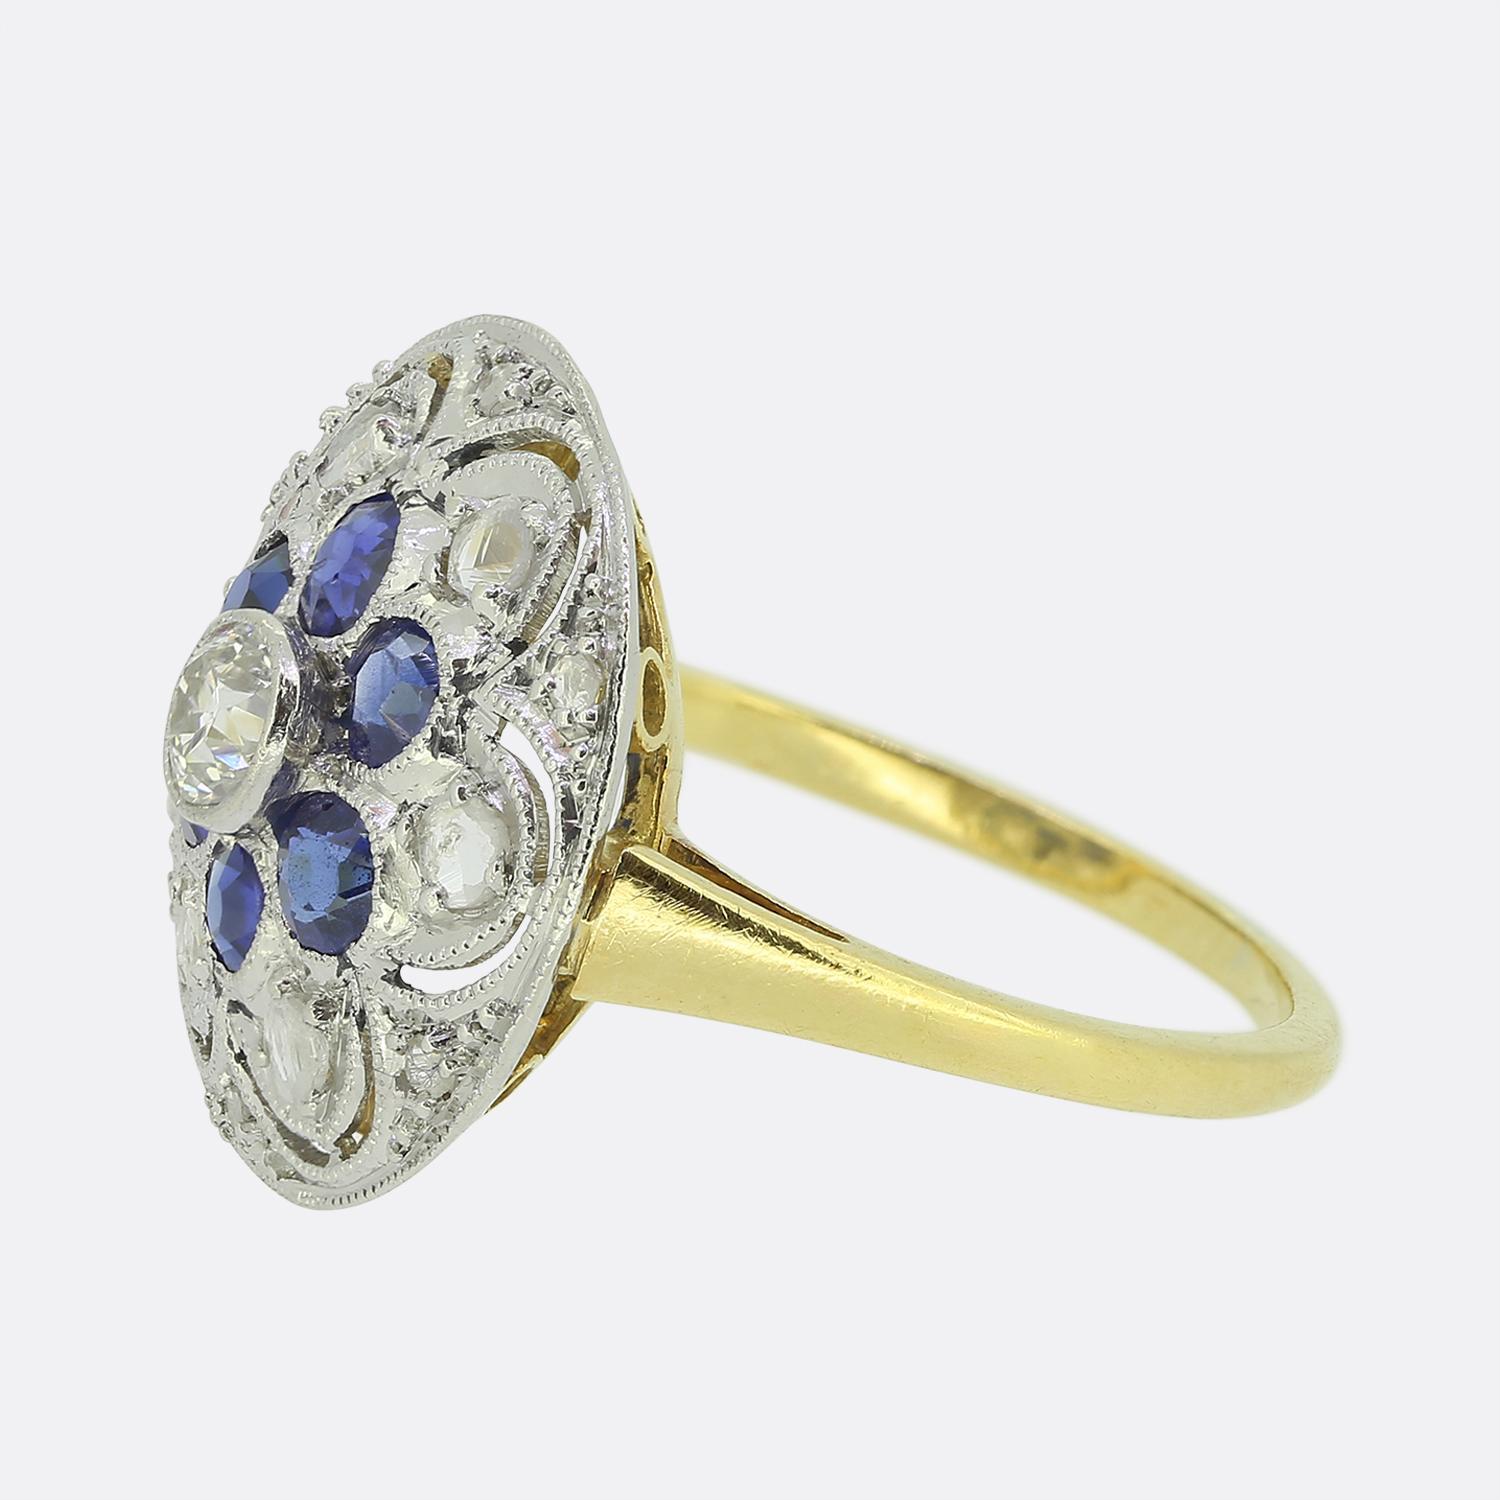 Here we have a delightful sapphire and diamond cluster ring taken from the pinnacle of the Art Deco movement. A single round faceted old mine cut diamond sits proud at the centre of the face in a bezel setting. This principal stone is then